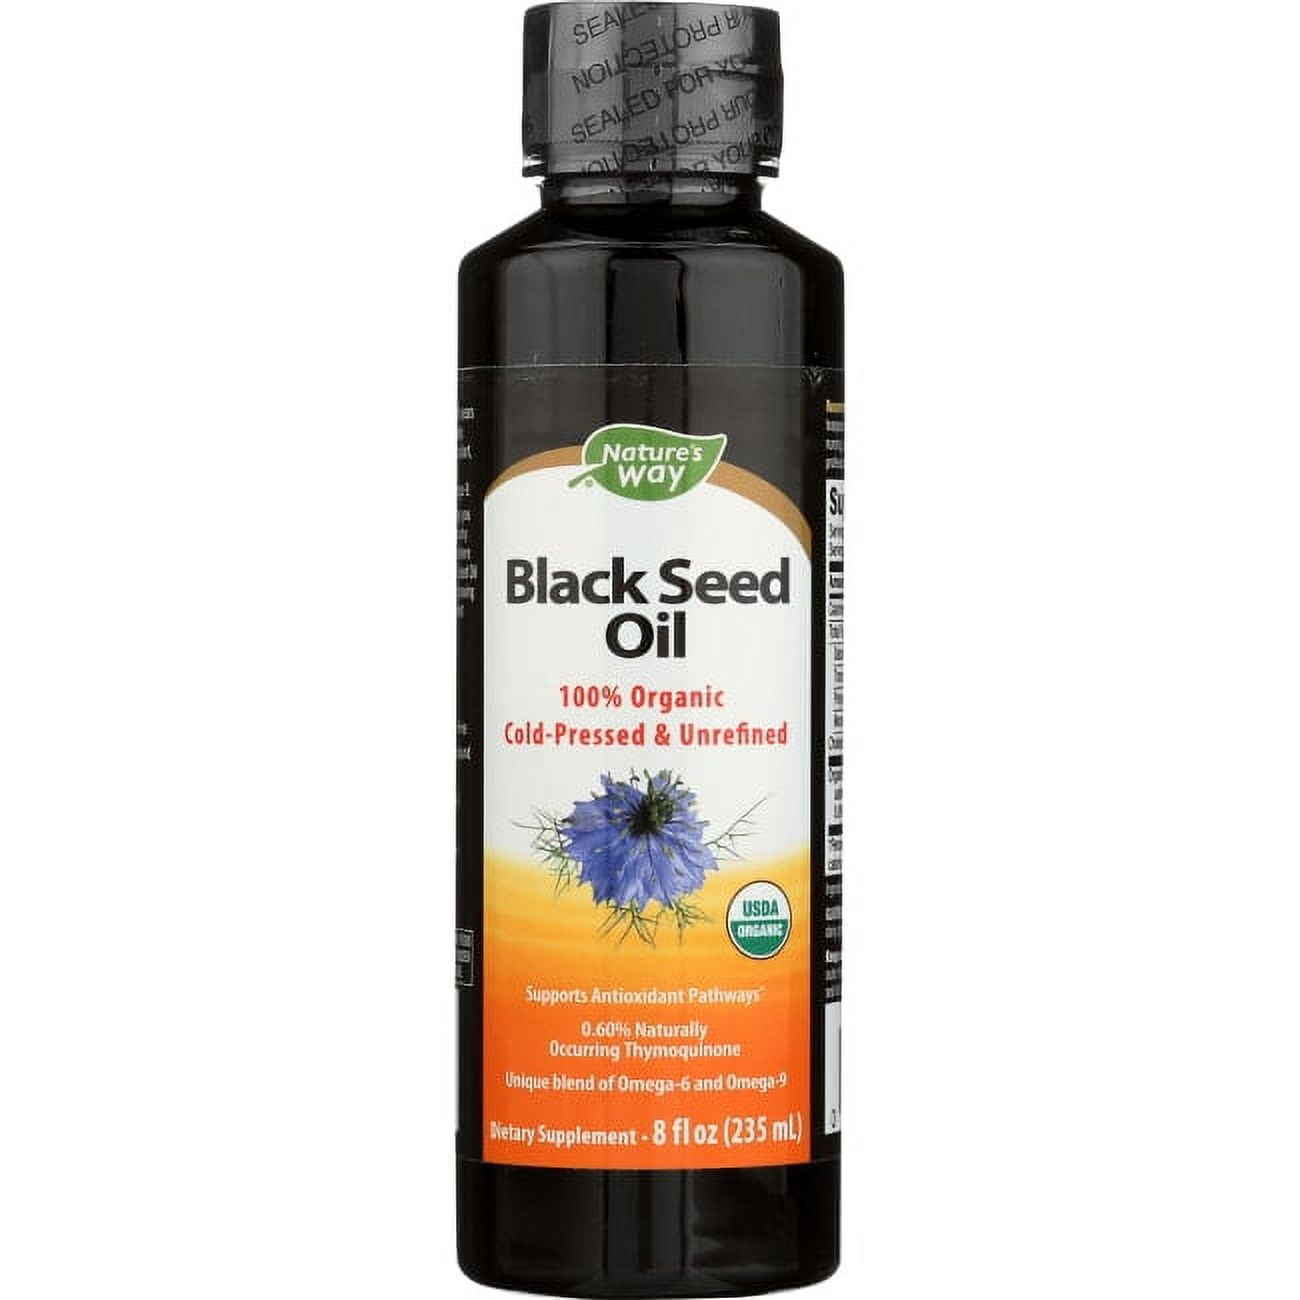 Does Black Seed Oil Makes You Lose Weight? – Nature's Blends